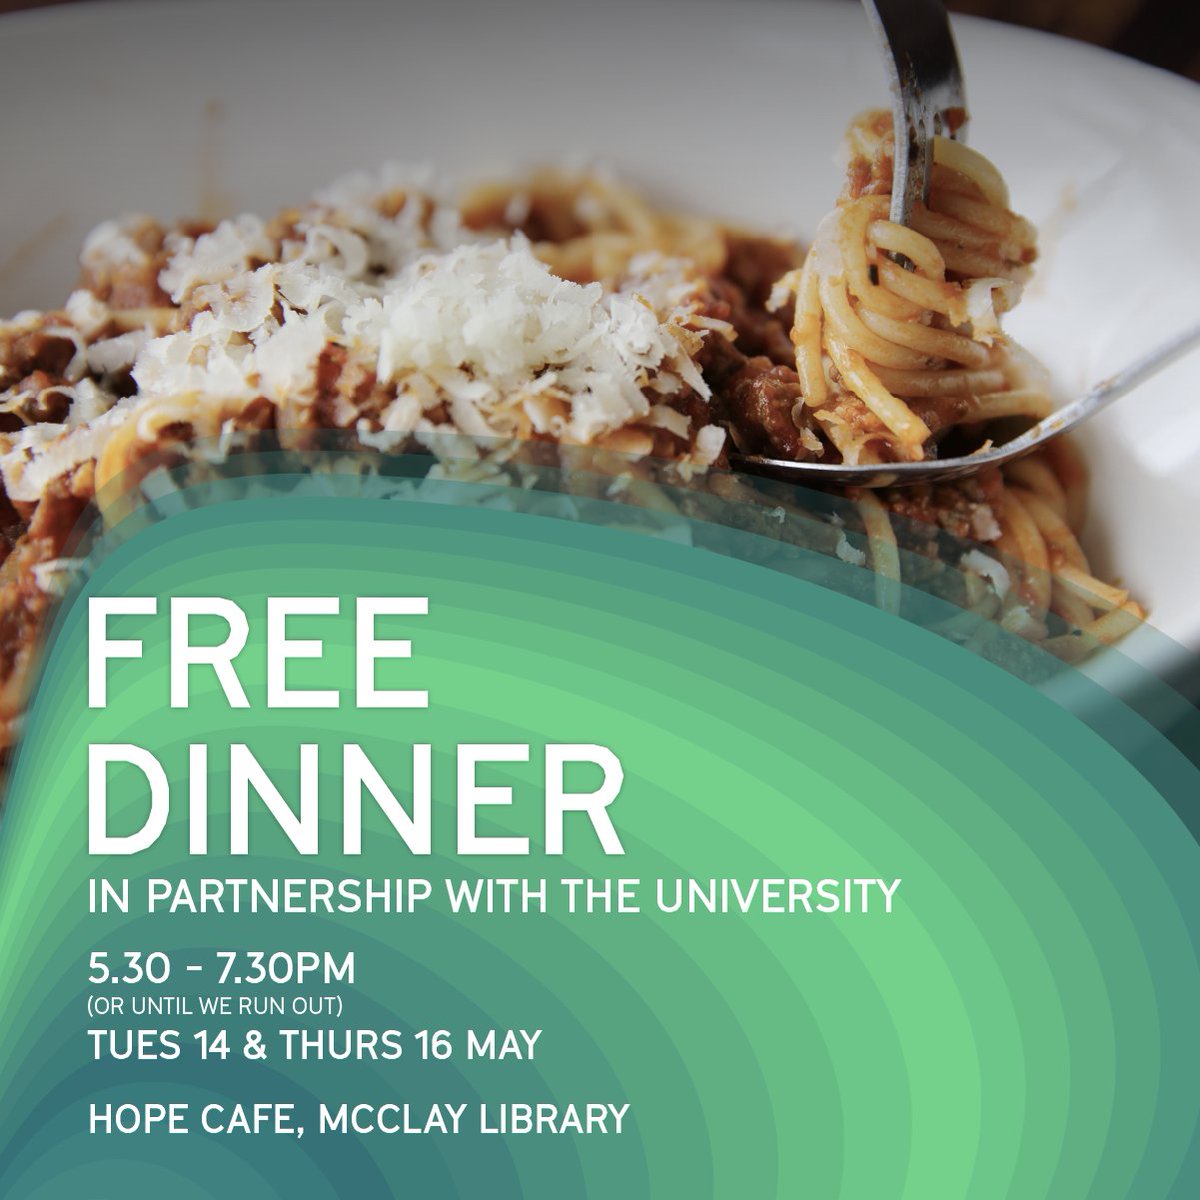 We’ve partnered with @QUBelfast to offer our students free meals on: 7, 8, 9 May, 11.30am-2pm: Free Lunch in SU Foyer 14 & 16 May, 5.30-7.30pm: Free Dinner in Hope Café, McClay Library Vegan & Gluten Free options available. Presentation of student card required.